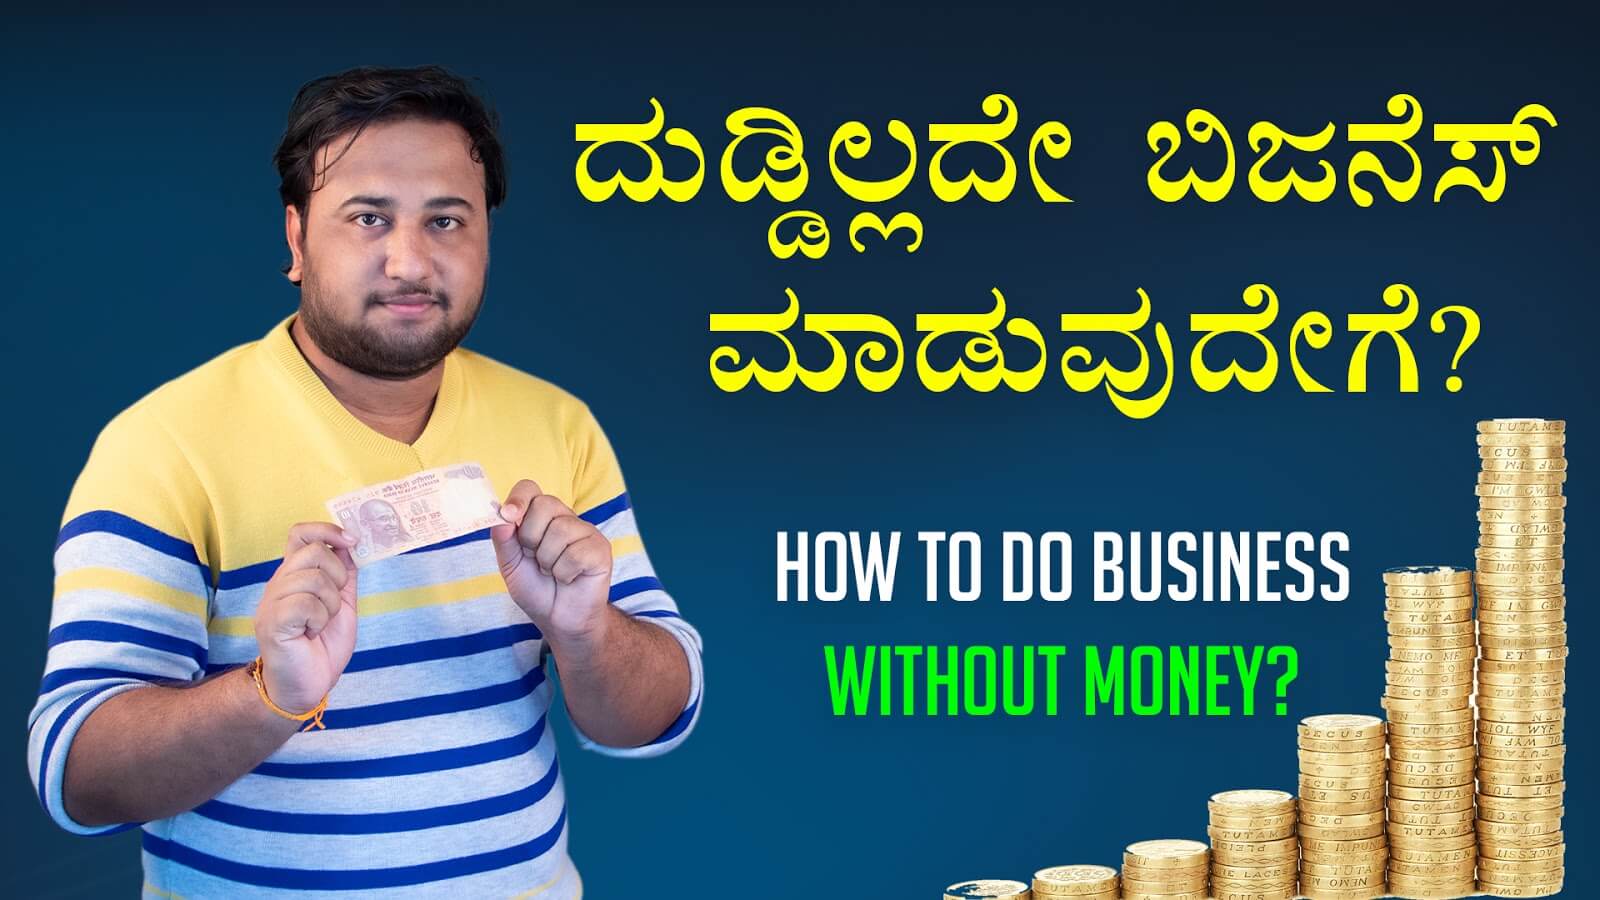 You are currently viewing ದುಡ್ಡಿಲ್ಲದೇ ಬಿಜನೆಸ್ ಮಾಡುವುದೇಗೆ? – How to do Business without money? – Ultra Business Boot Strapping in Kannada